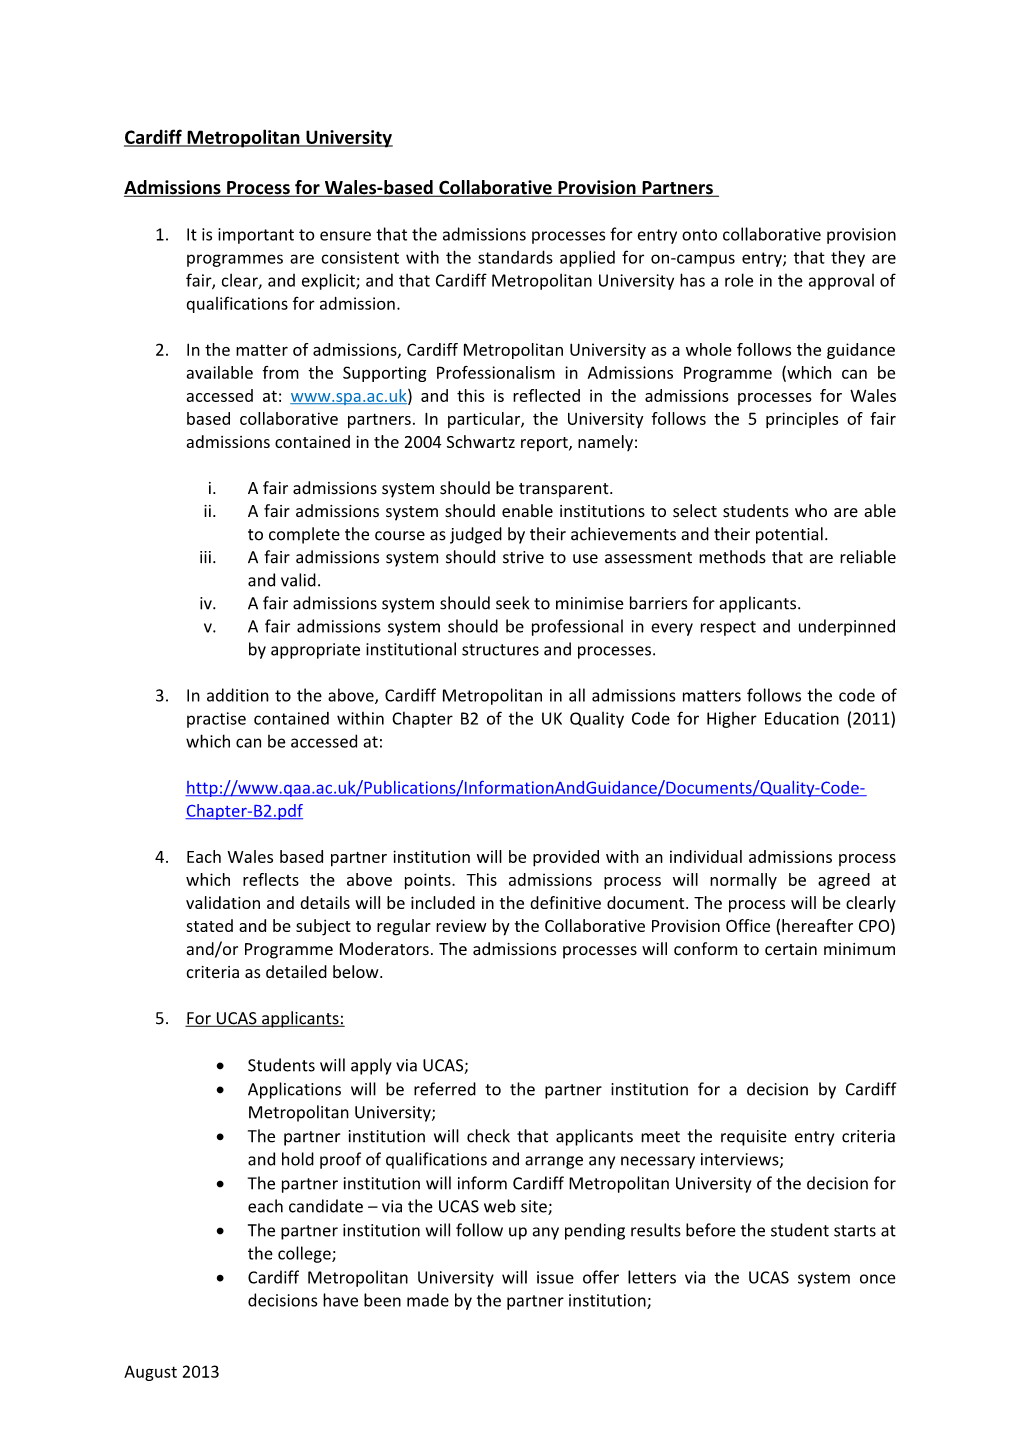 Admissions Policy 2013-14 for Wales Based Partners